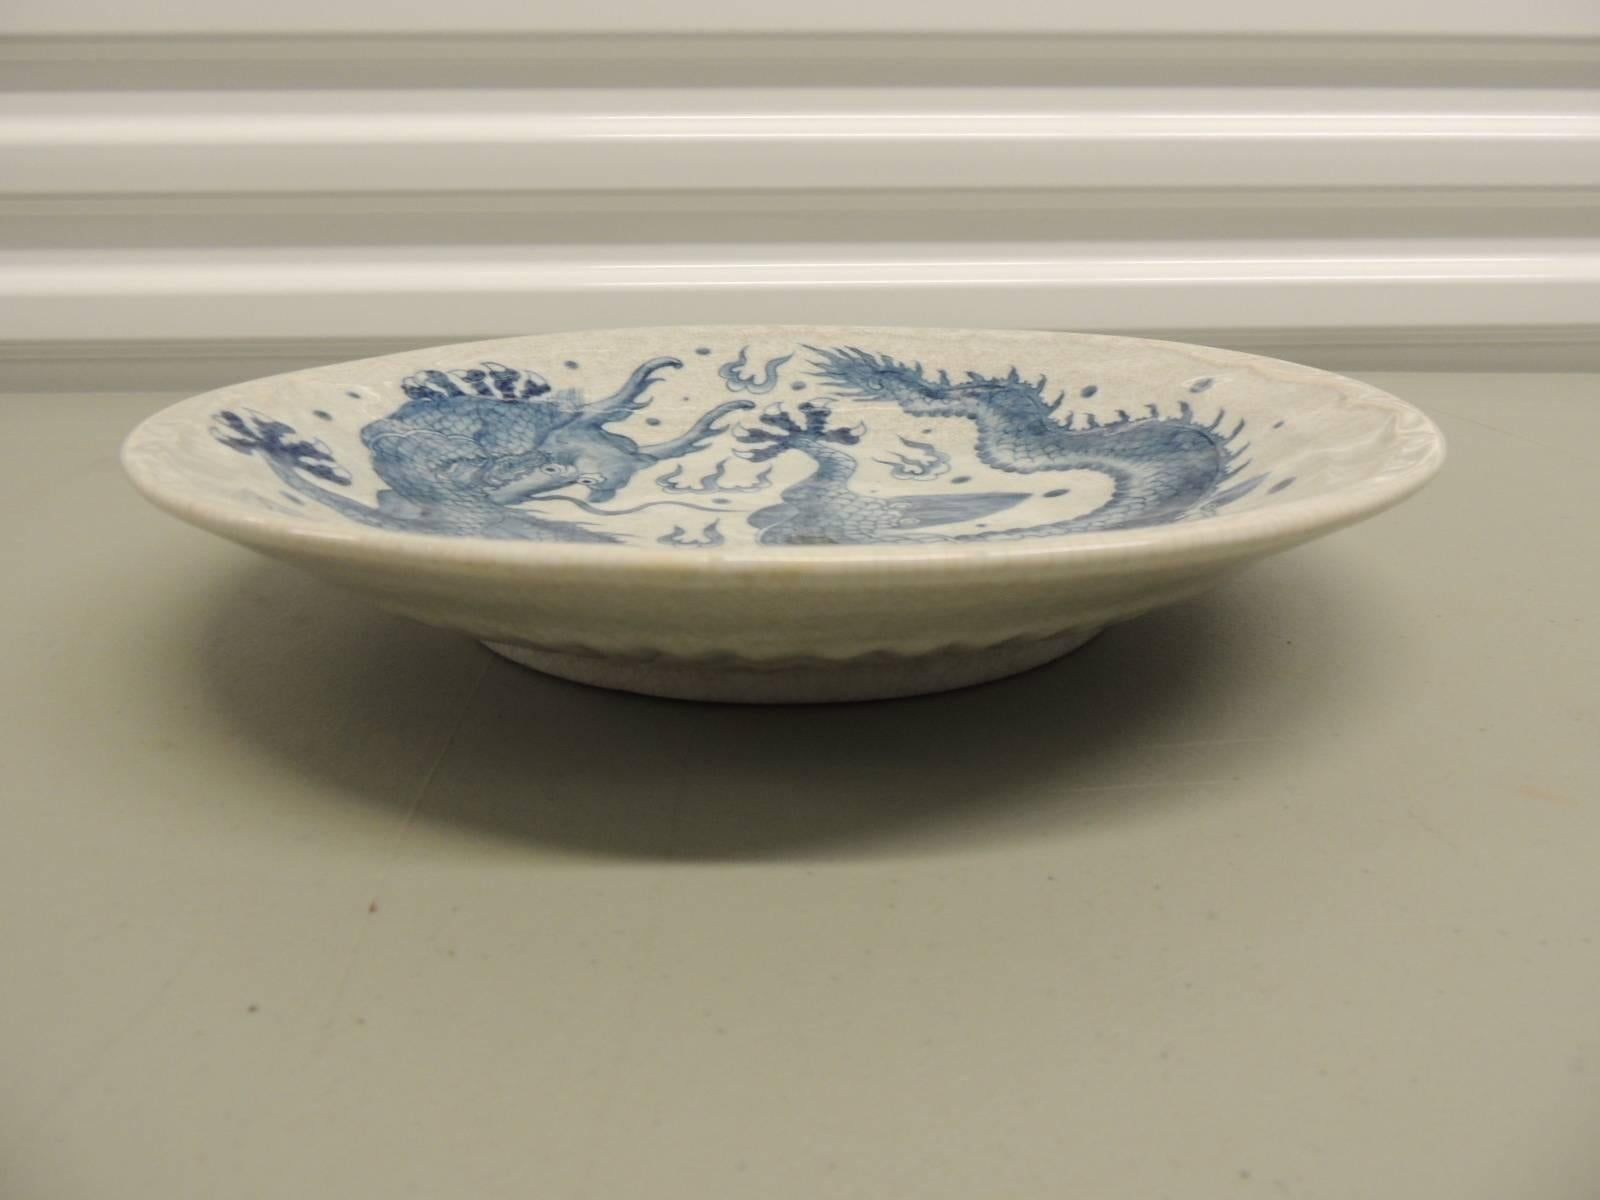 Vintage large Asian crackle wear blue dragon ceramic serving bowl.  In the style of Chinese export porcelain.  Chinese export porcelain includes a wide range of Chinese porcelain that was made exclusively for export to Europe and later to North